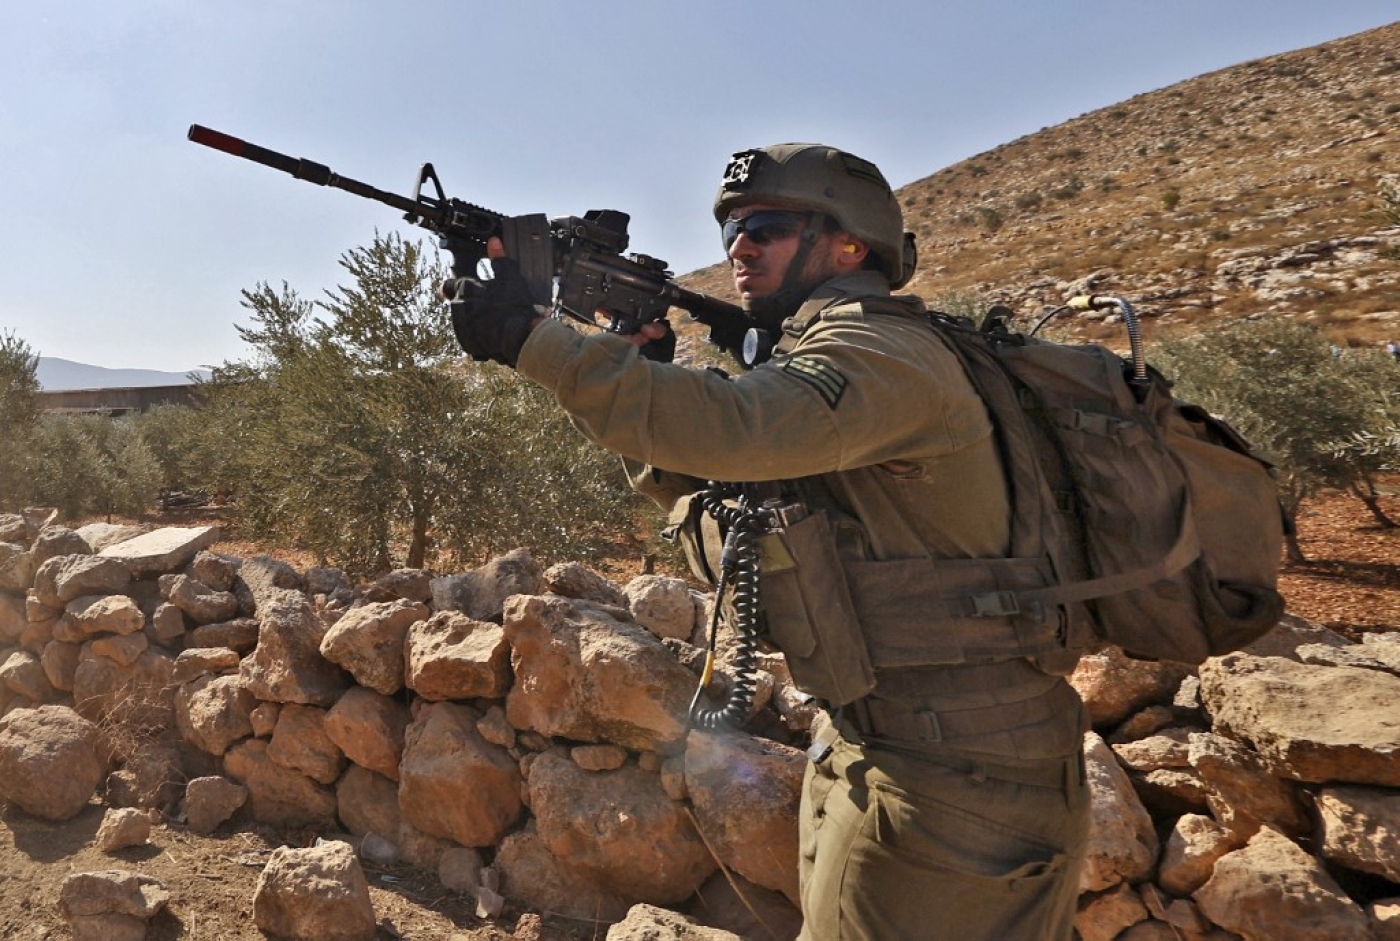 An Israeli soldier takes aim at Palestinians during a protest against the establishment of Israeli outposts, in Beit Dajan, east of the occupied West Bank city of Nablus, on 4 November 2022 (AFP)